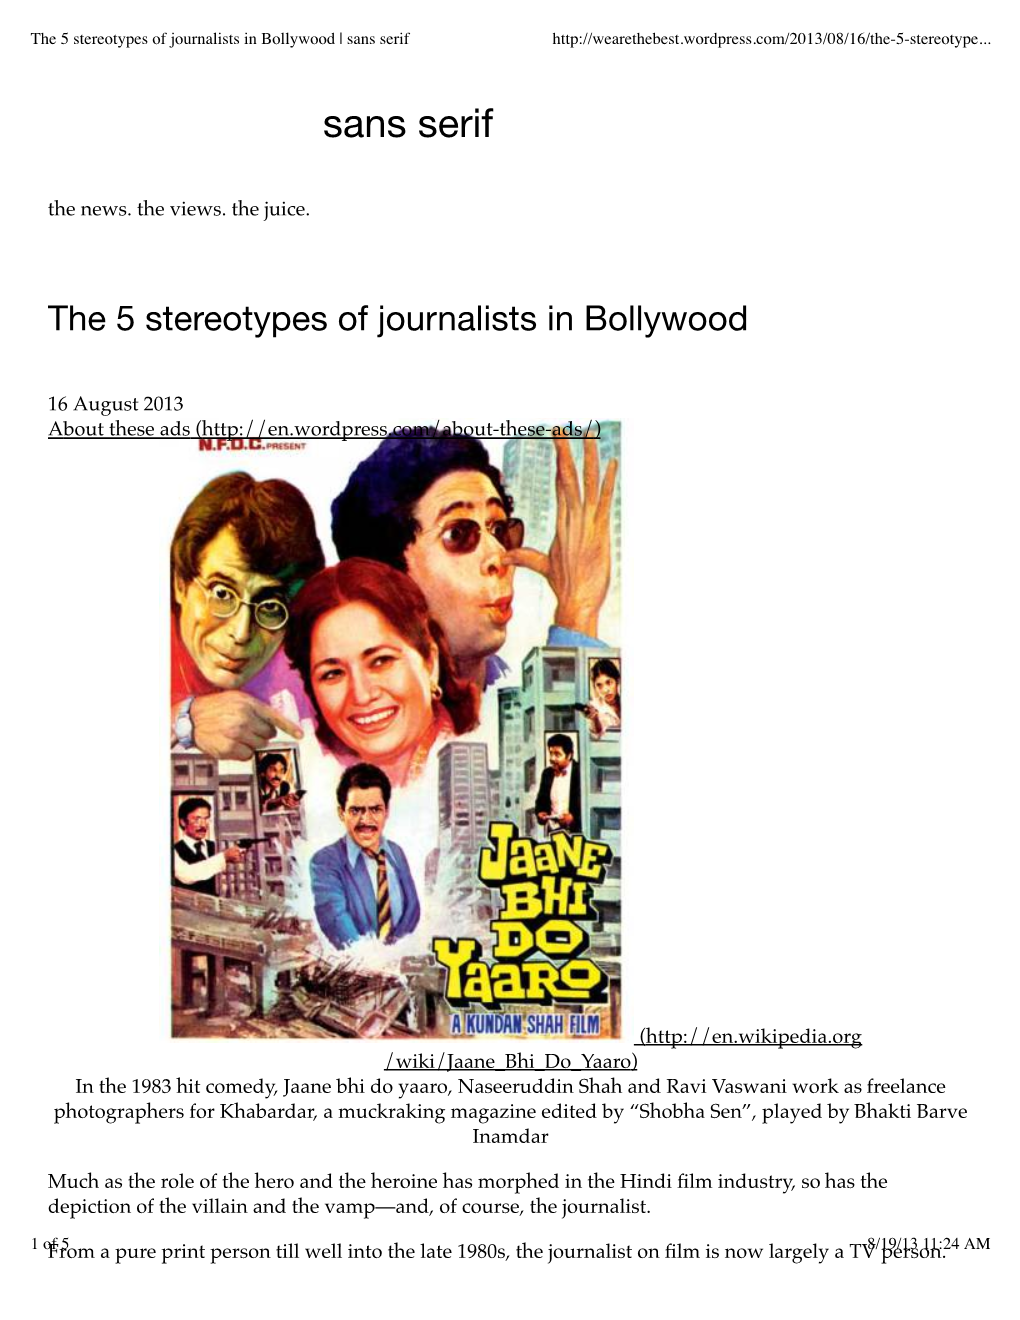 The 5 Stereotypes of Journalists in Bollywood | Sans Serif